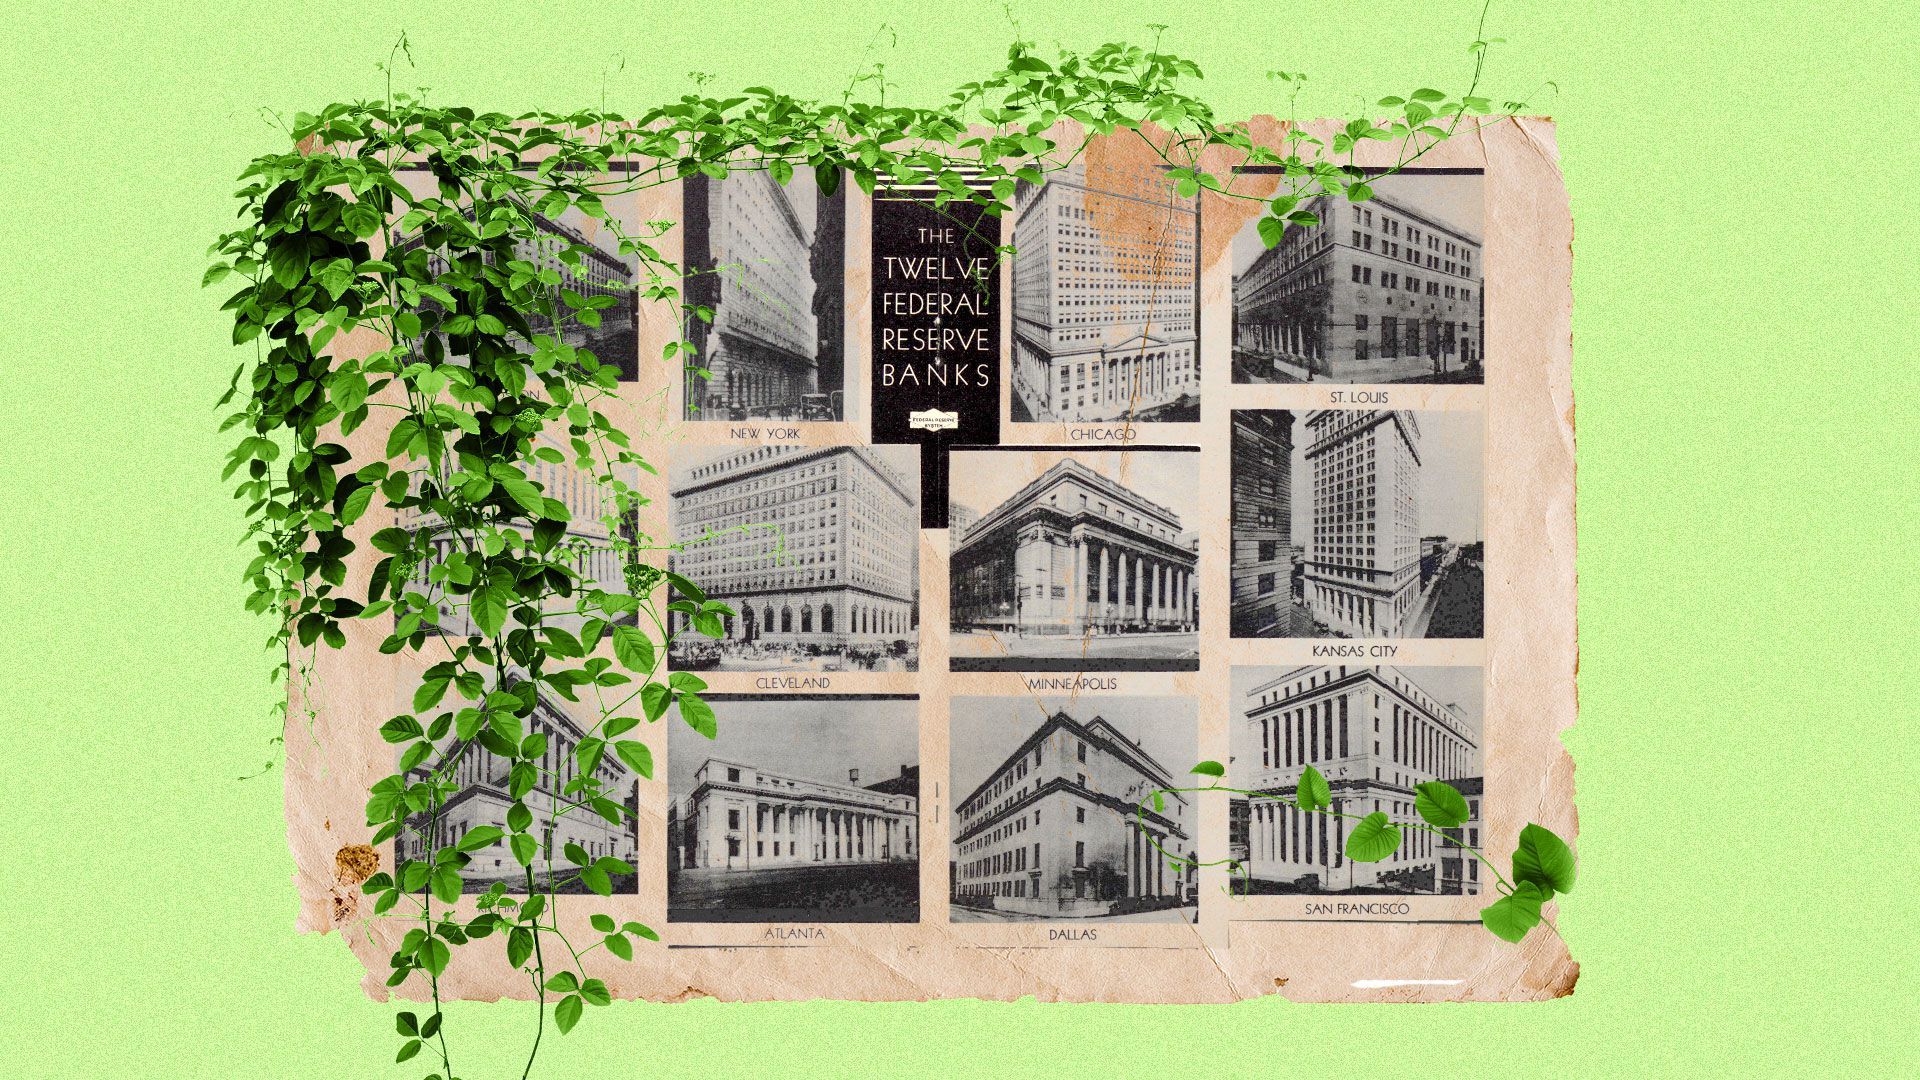 Illustrated collage of a historical image of the federal reserve banks with greenery. 